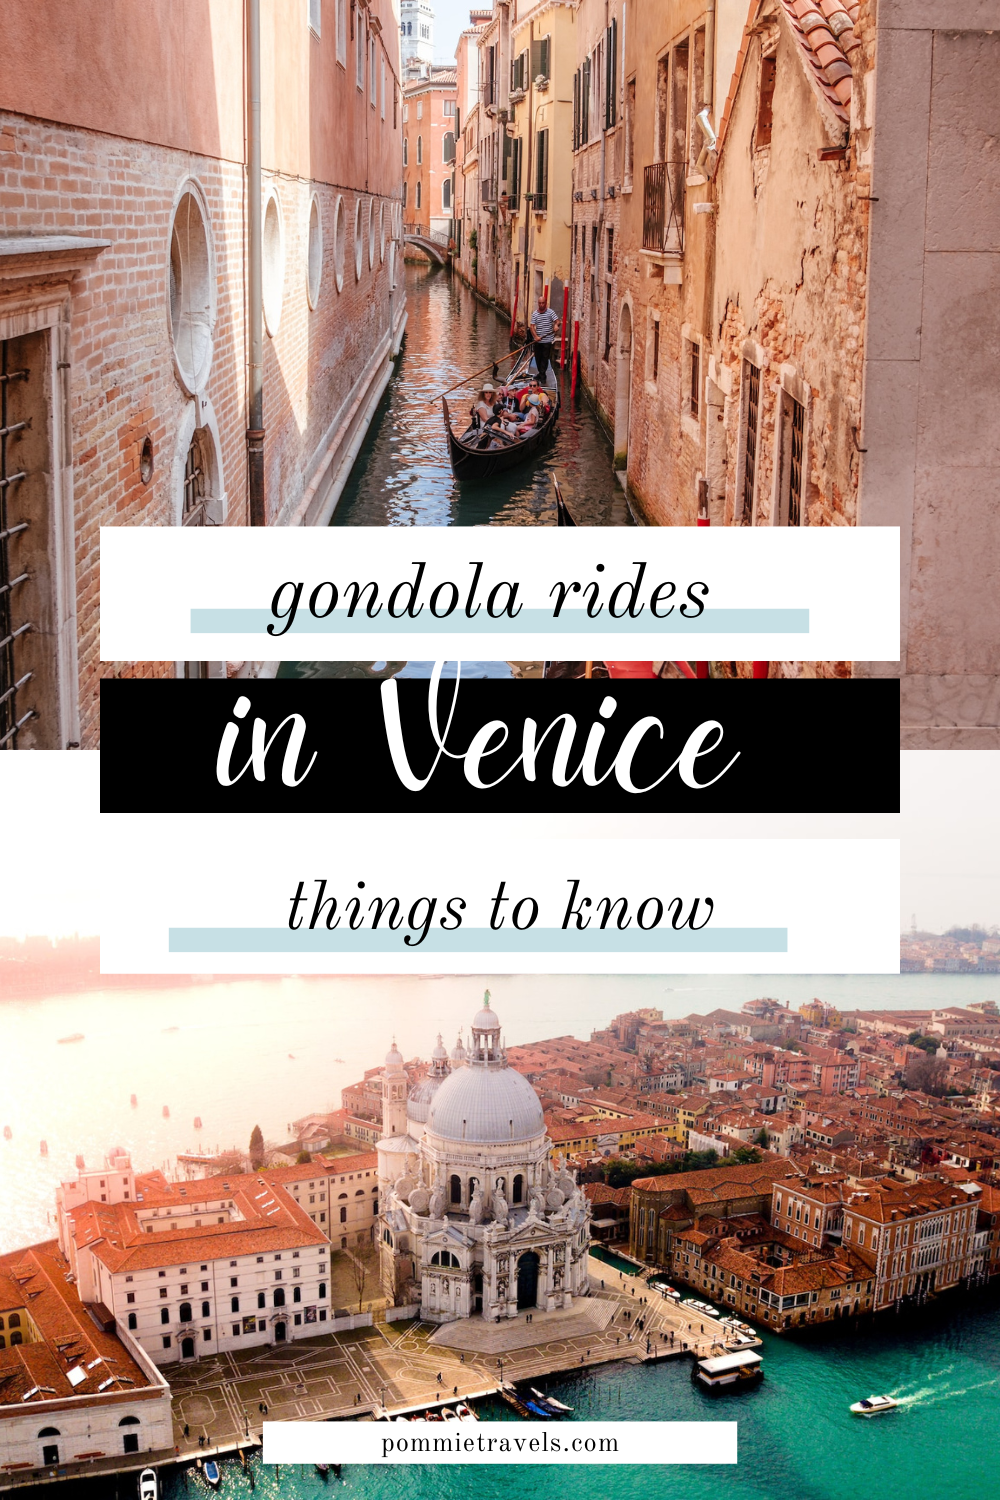 gondola rides in Venice - things to know